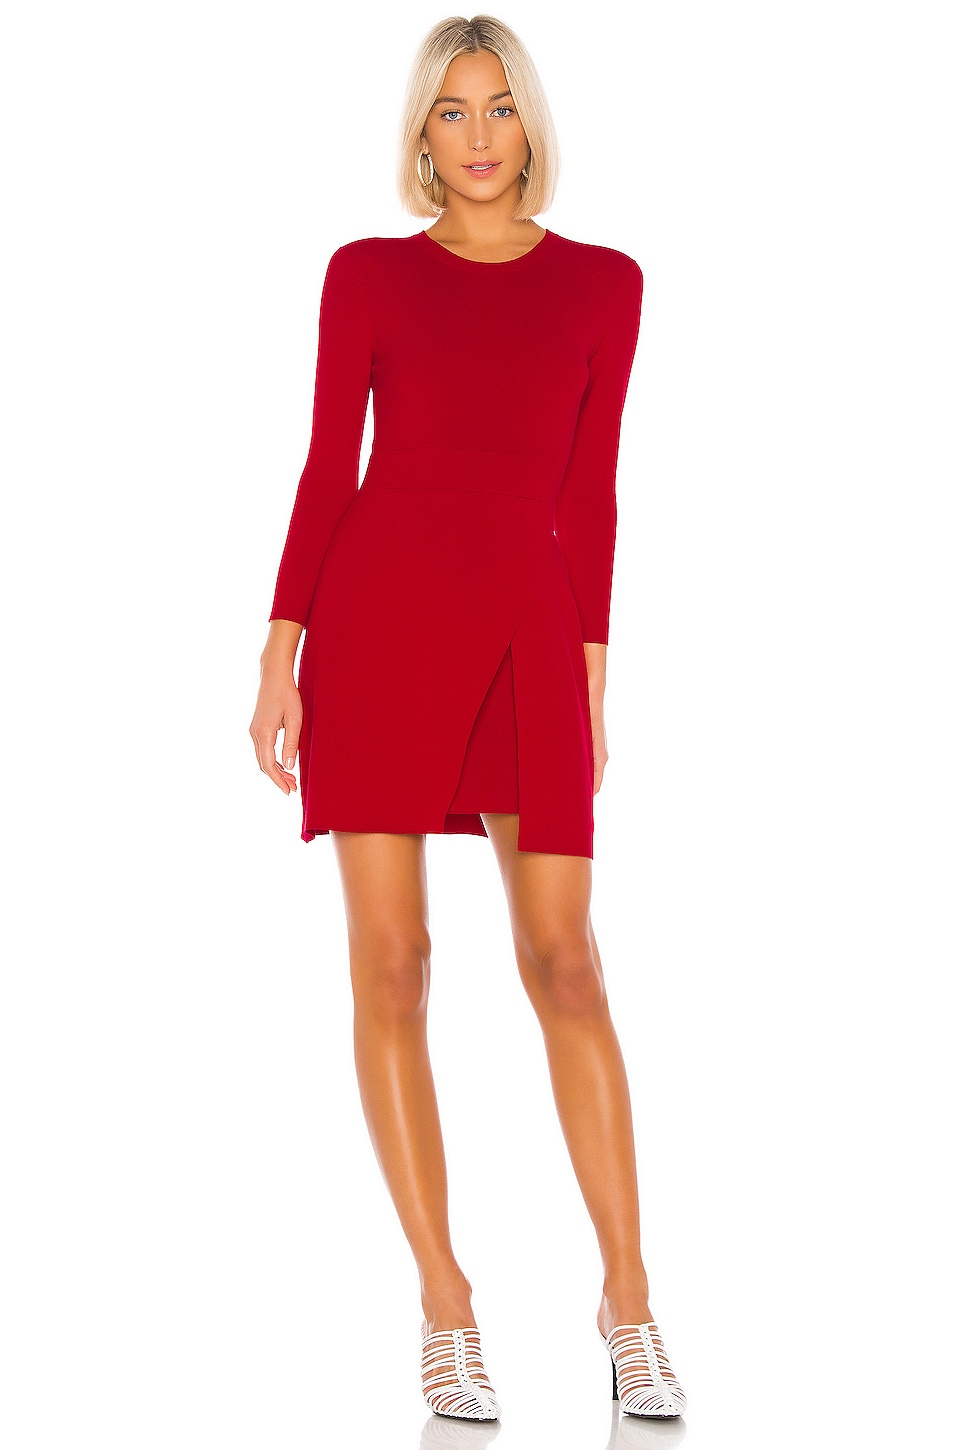 A.L.C. Hadley Dress in Apple Red | REVOLVE